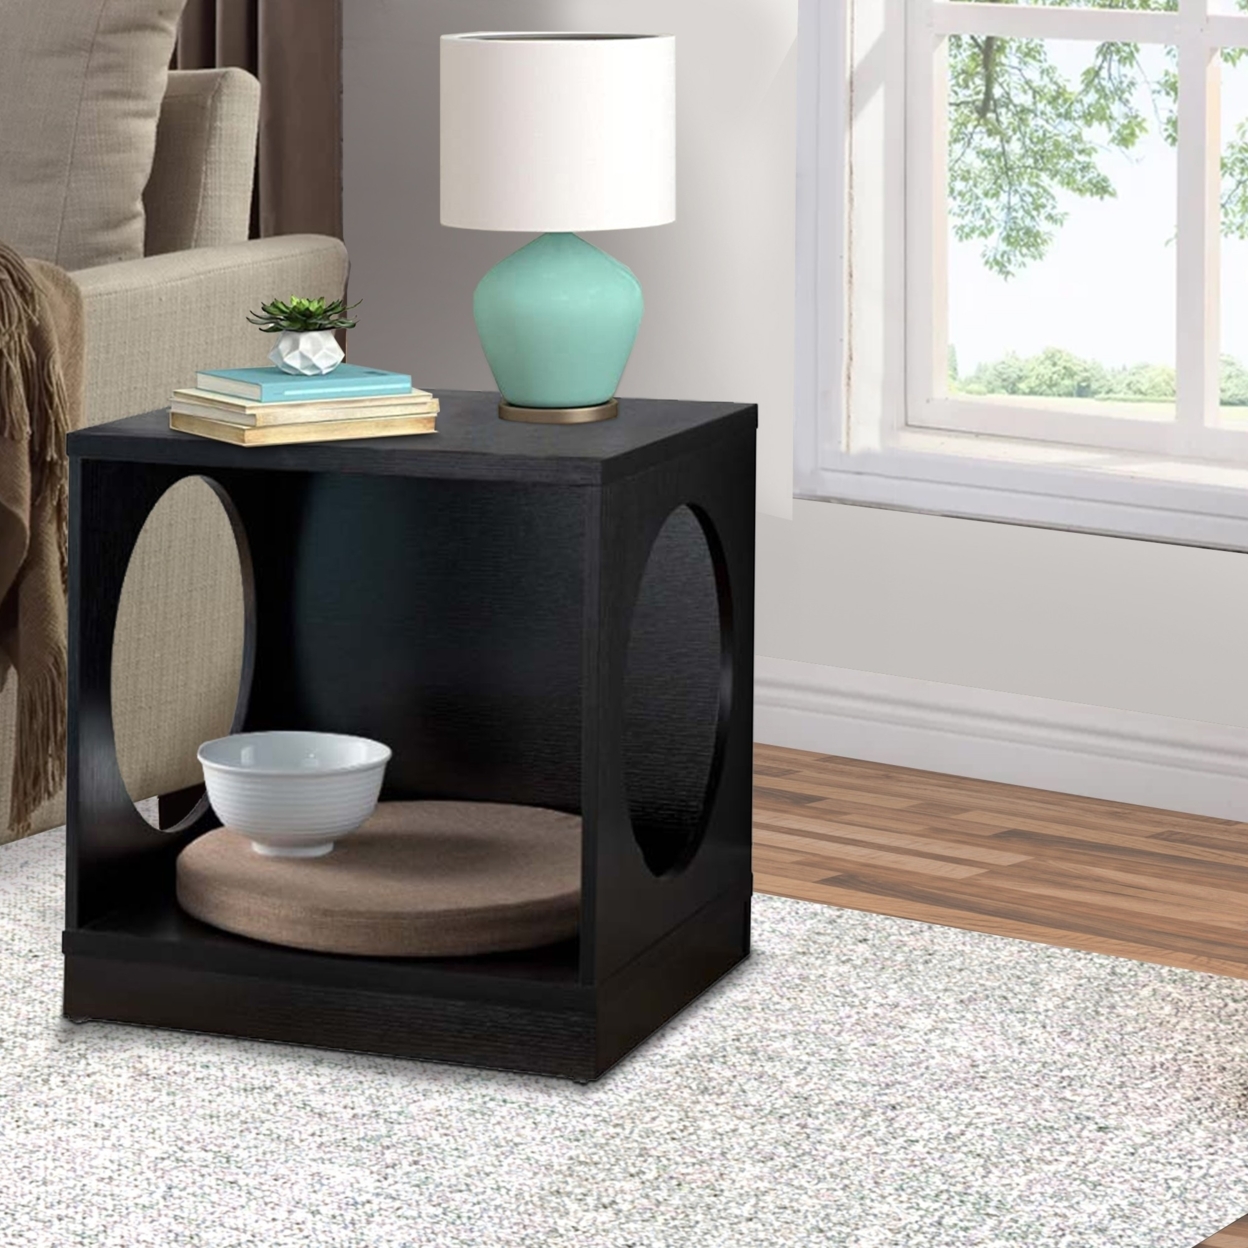 Wooden Pet End Table With Flat Base And Cutout Design On Sides, Black- Saltoro Sherpi